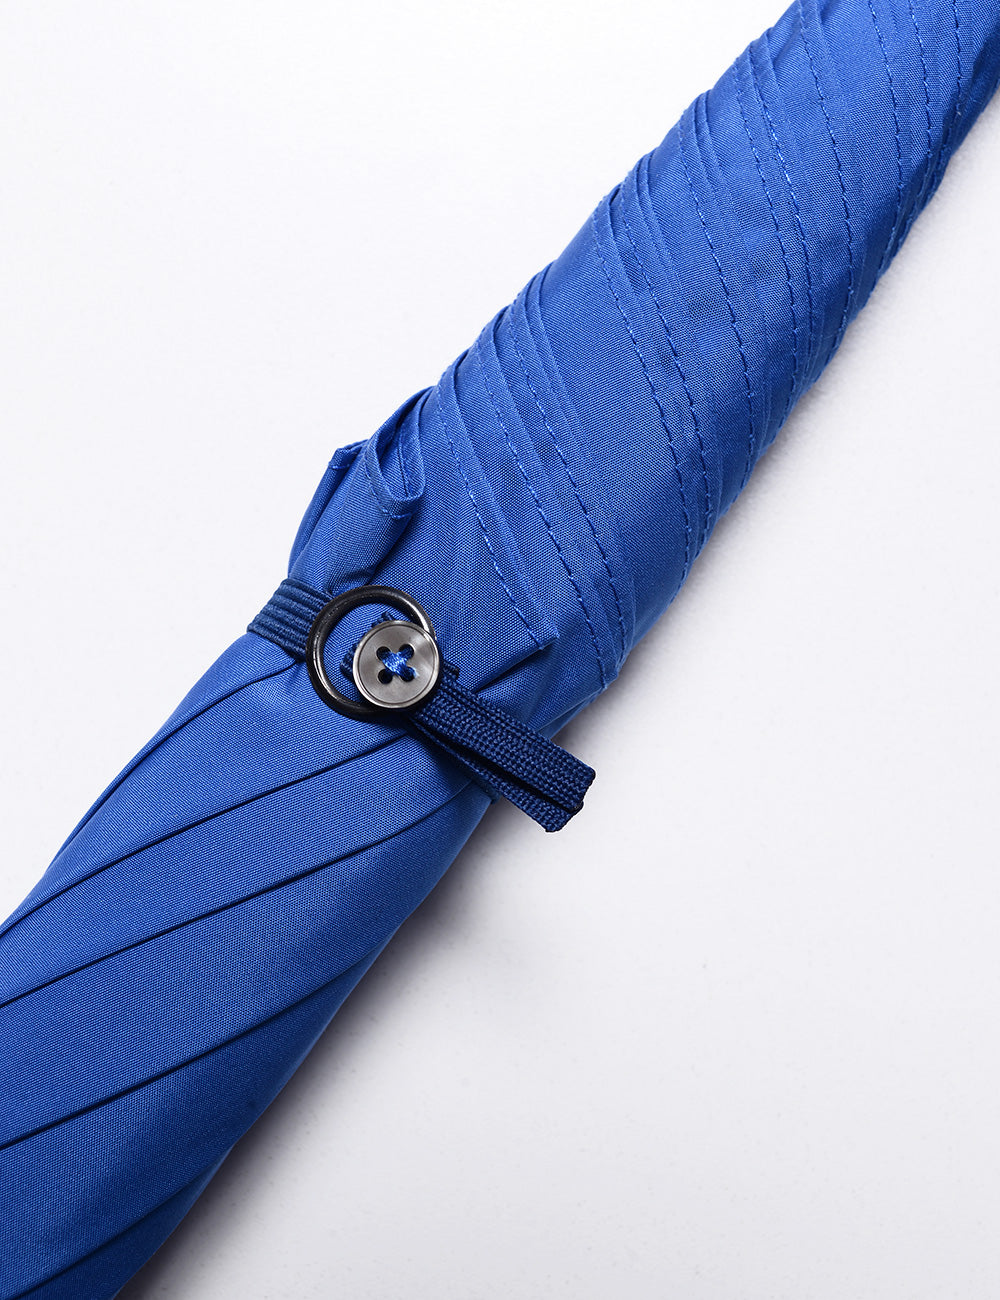 Button closure detail of GT1 Gentleman Tube Umbrella in Royal Blue